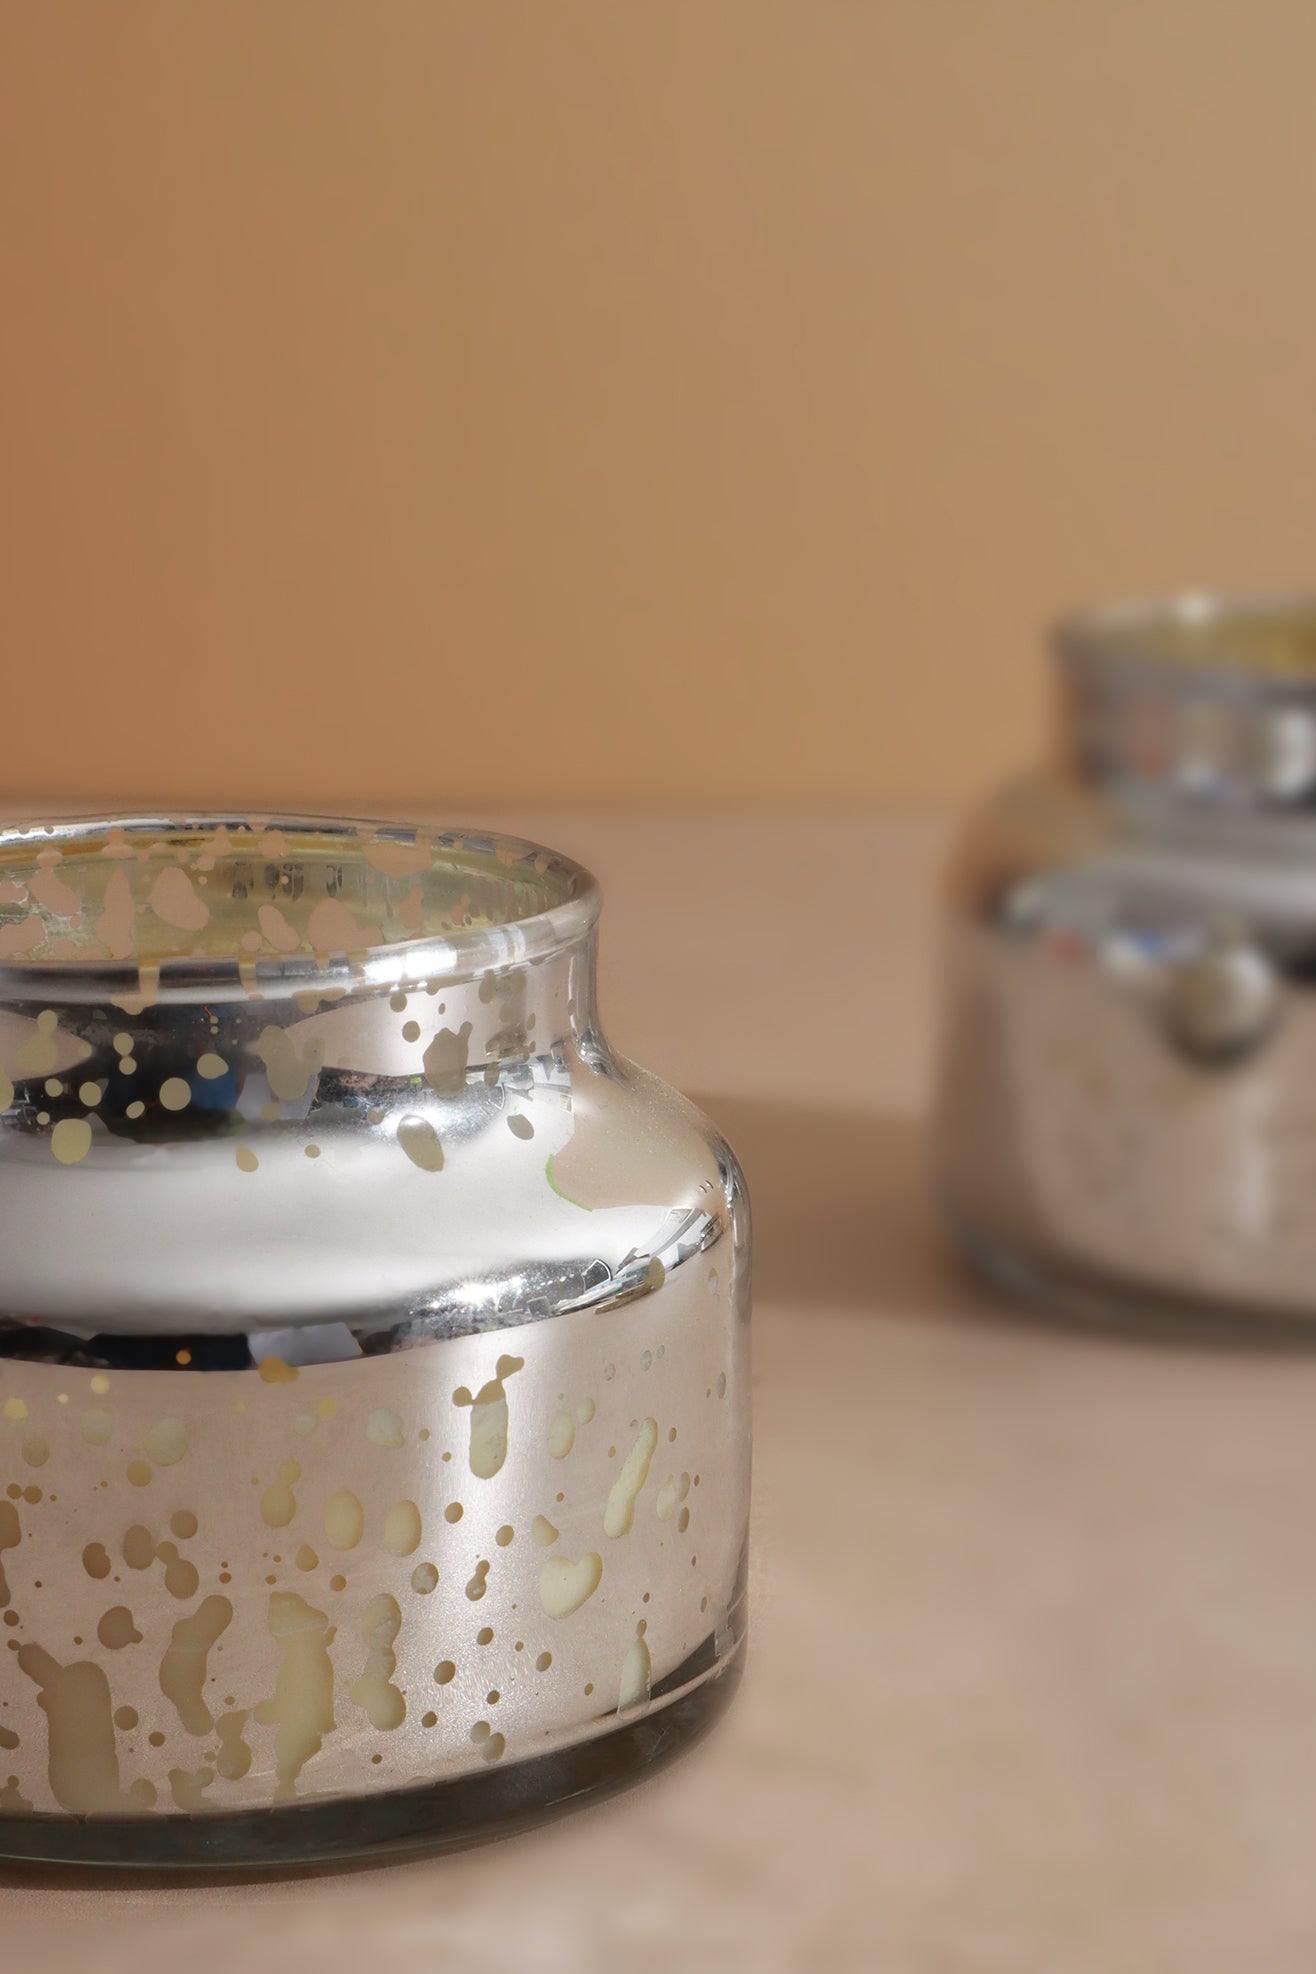 Set of 3 Scented Vela Silver Mercury Linen Soy, Perfect for Meditation, Small Jar Candles